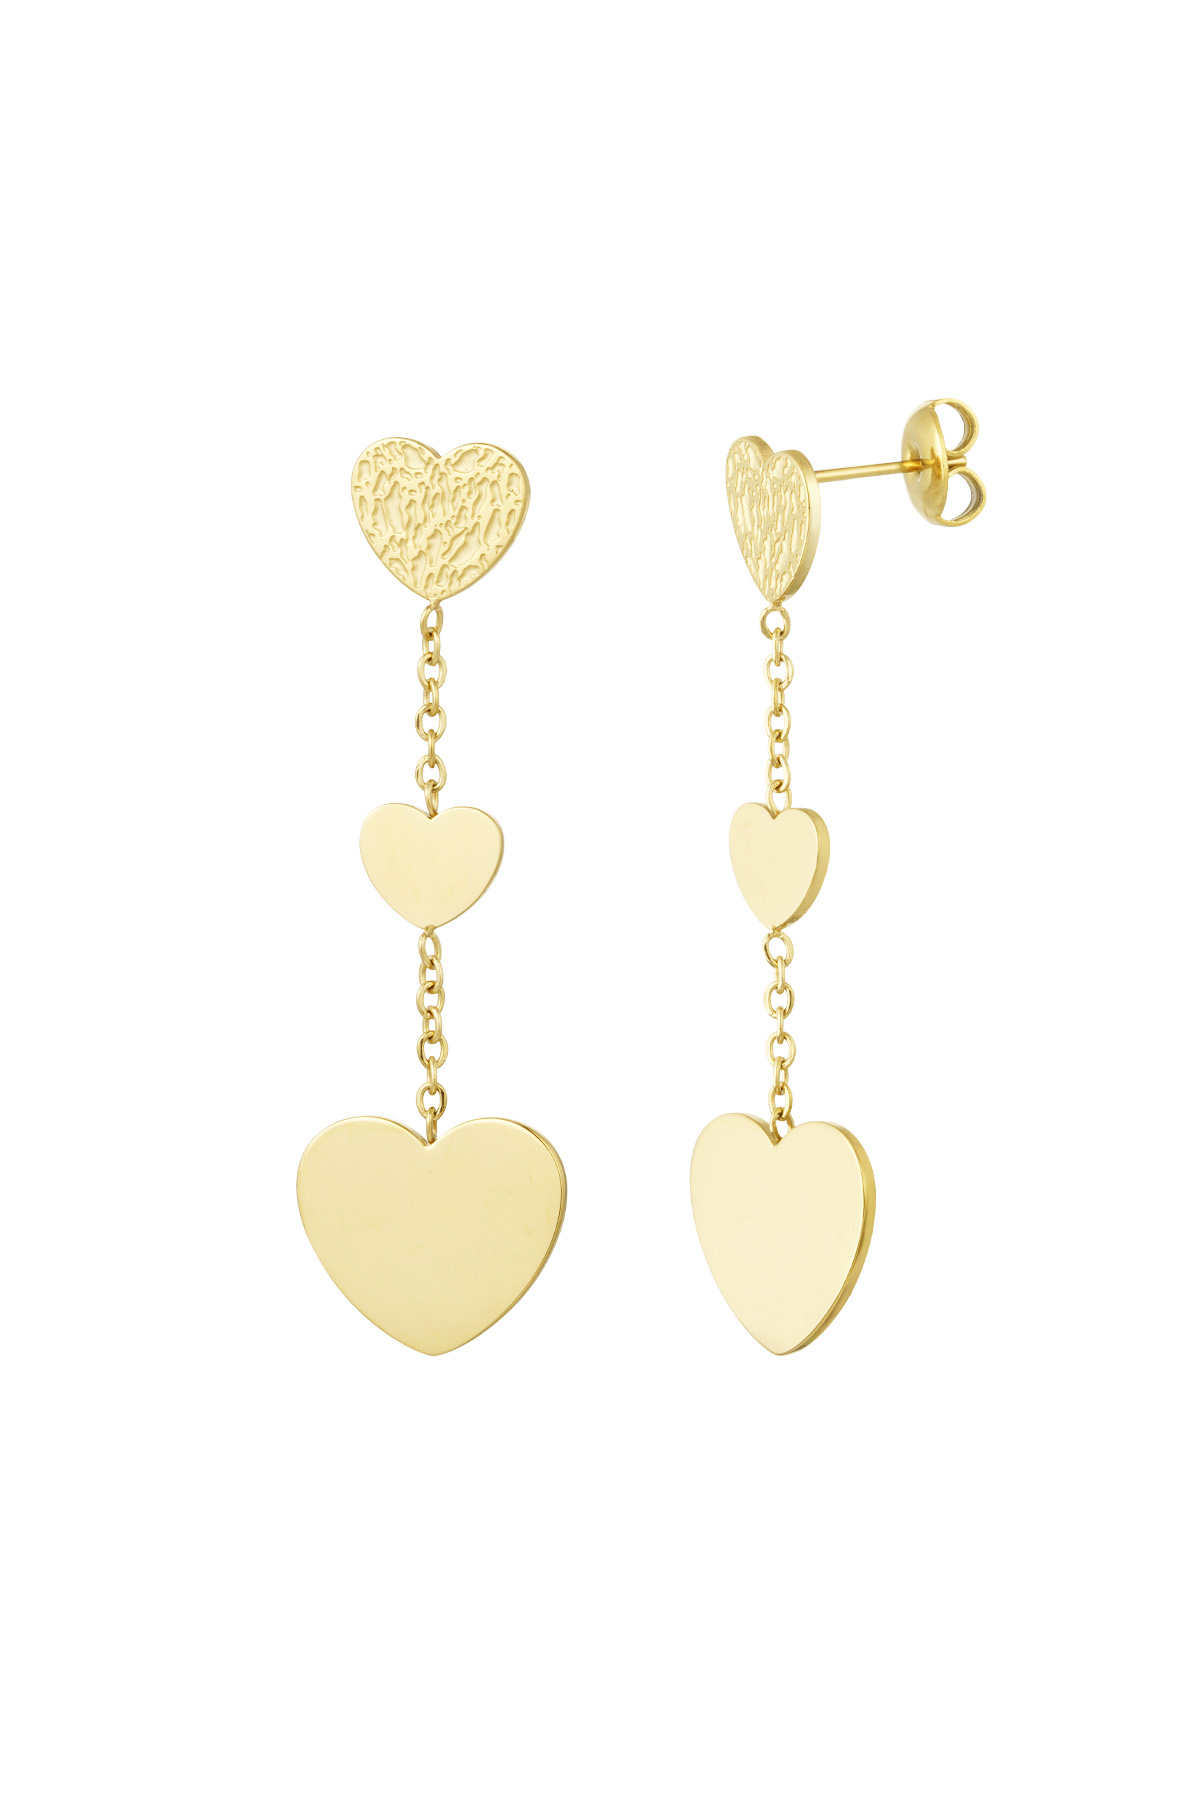 Charm earrings with Three heart-shaped